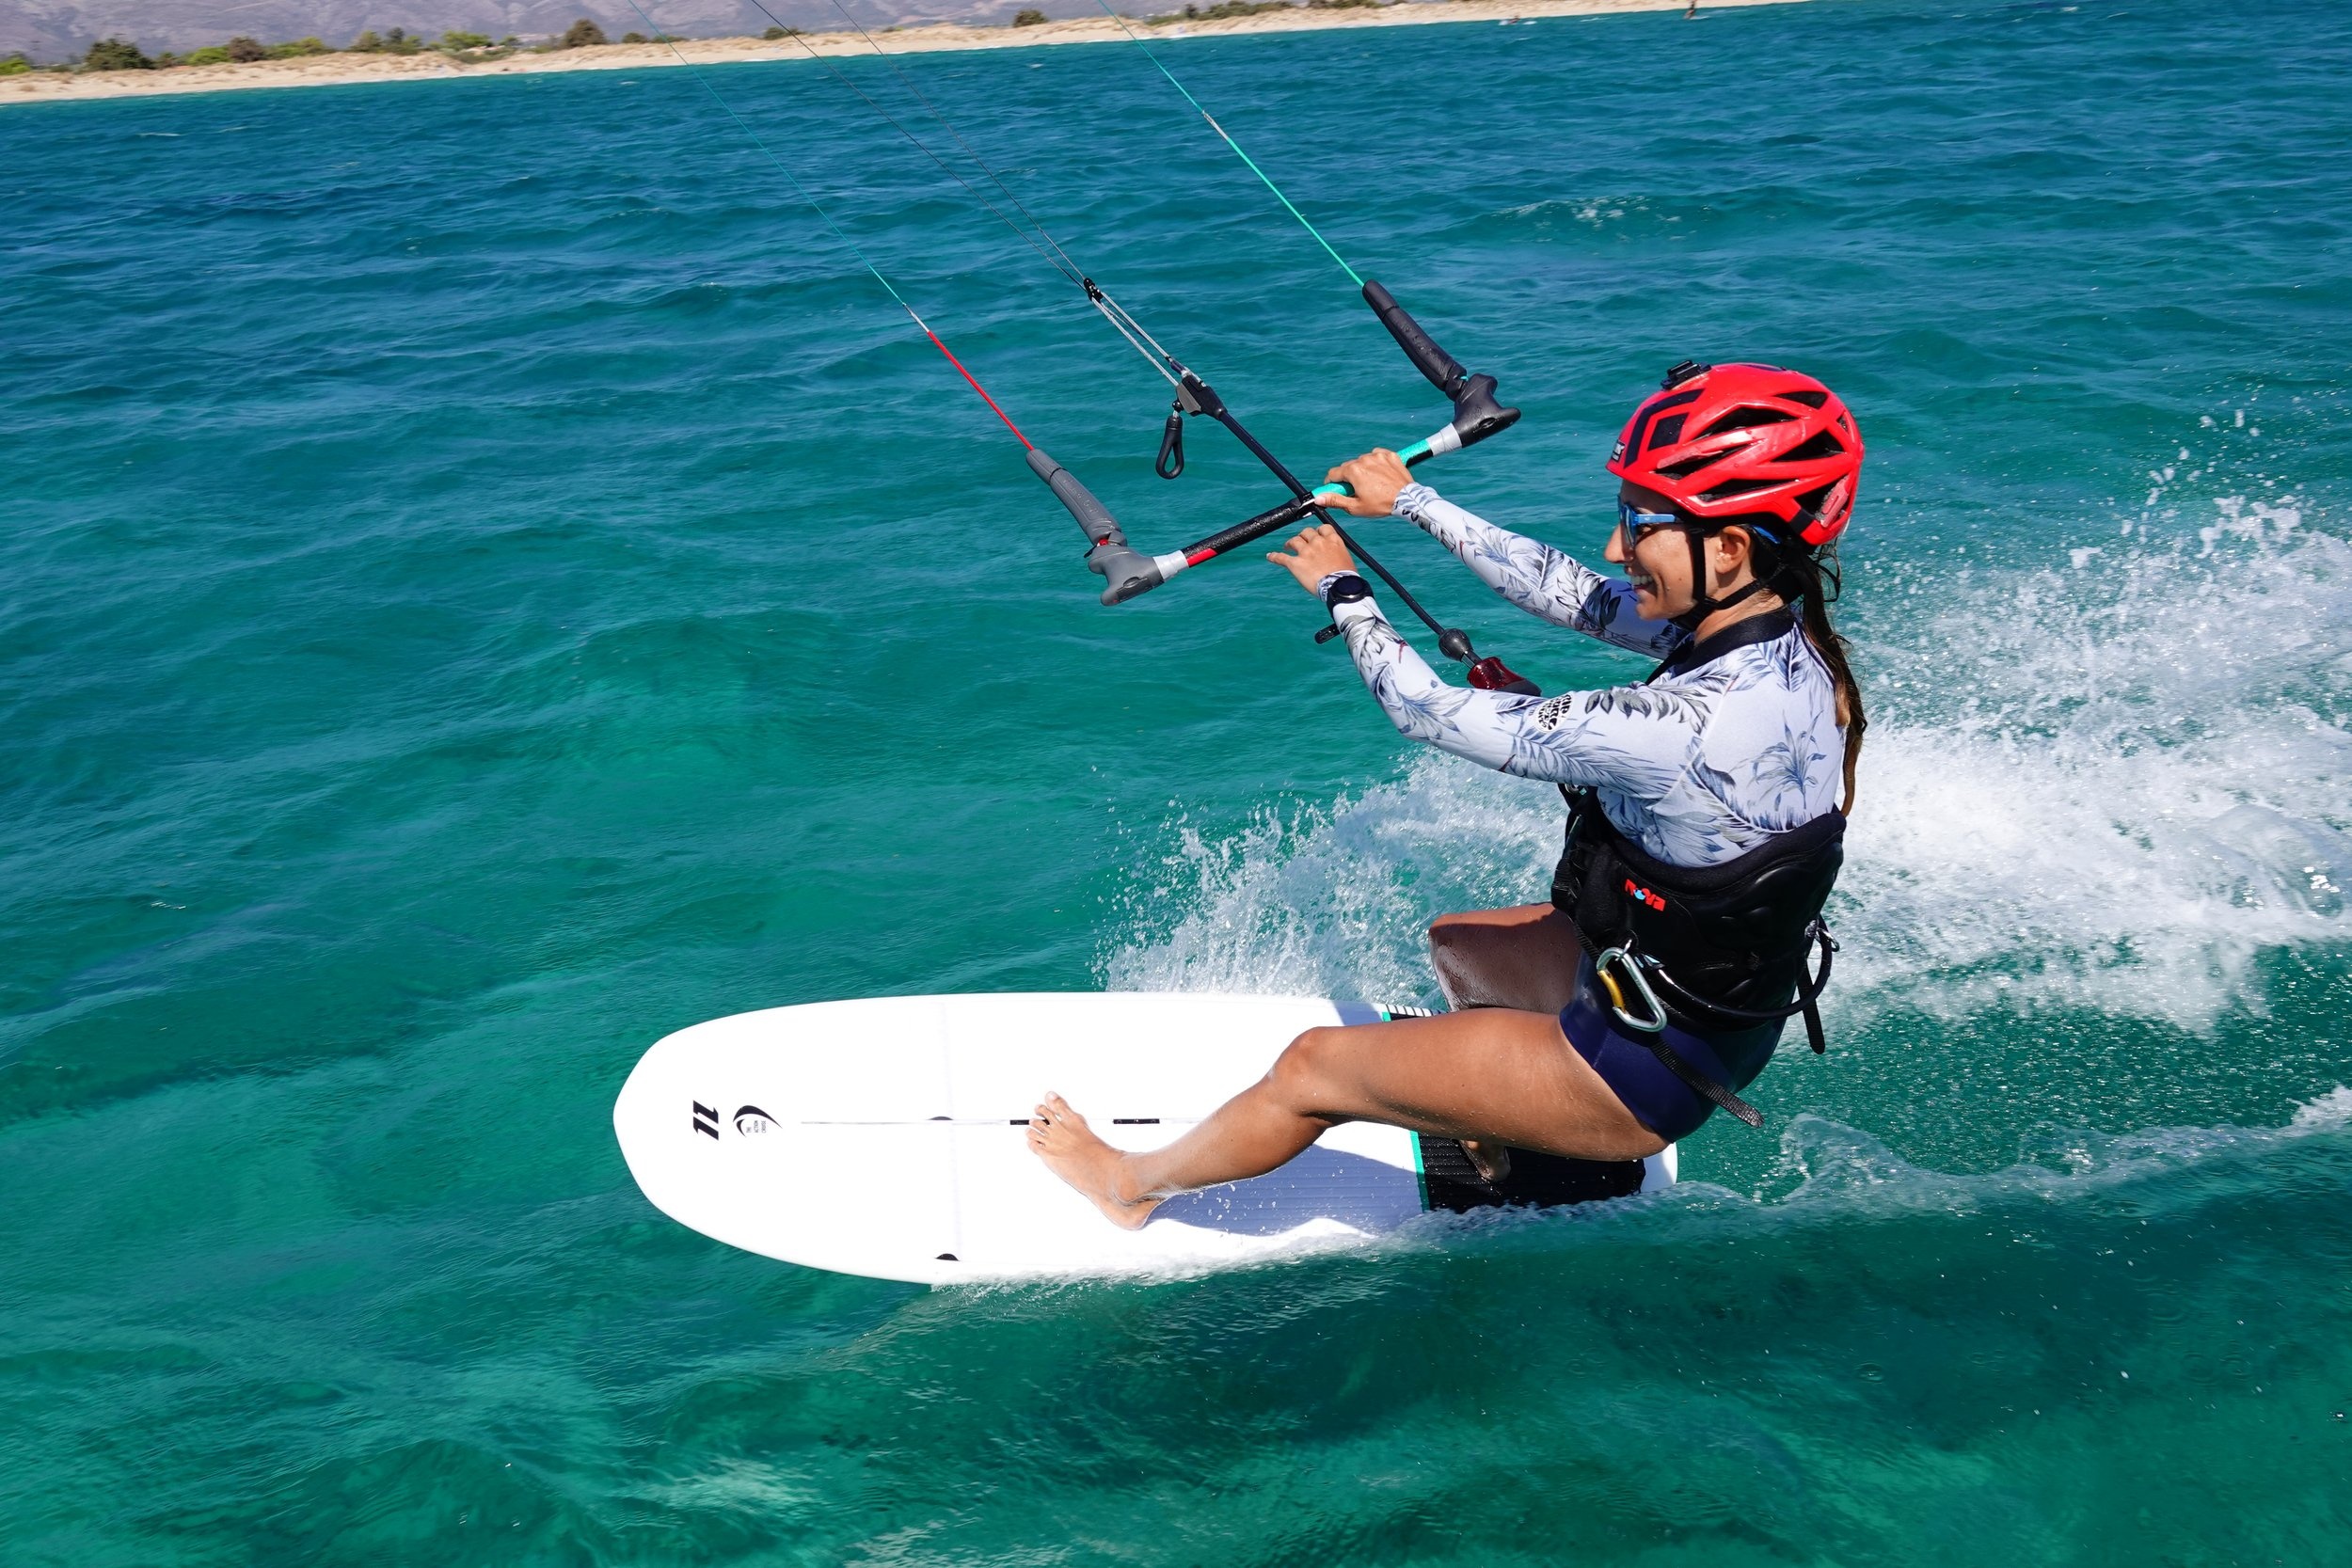 Kiteboarding: The action cruise, Kite from a sailing catamaran, Kite downwinds, Open sea passages. 2500x1670 HD Wallpaper.